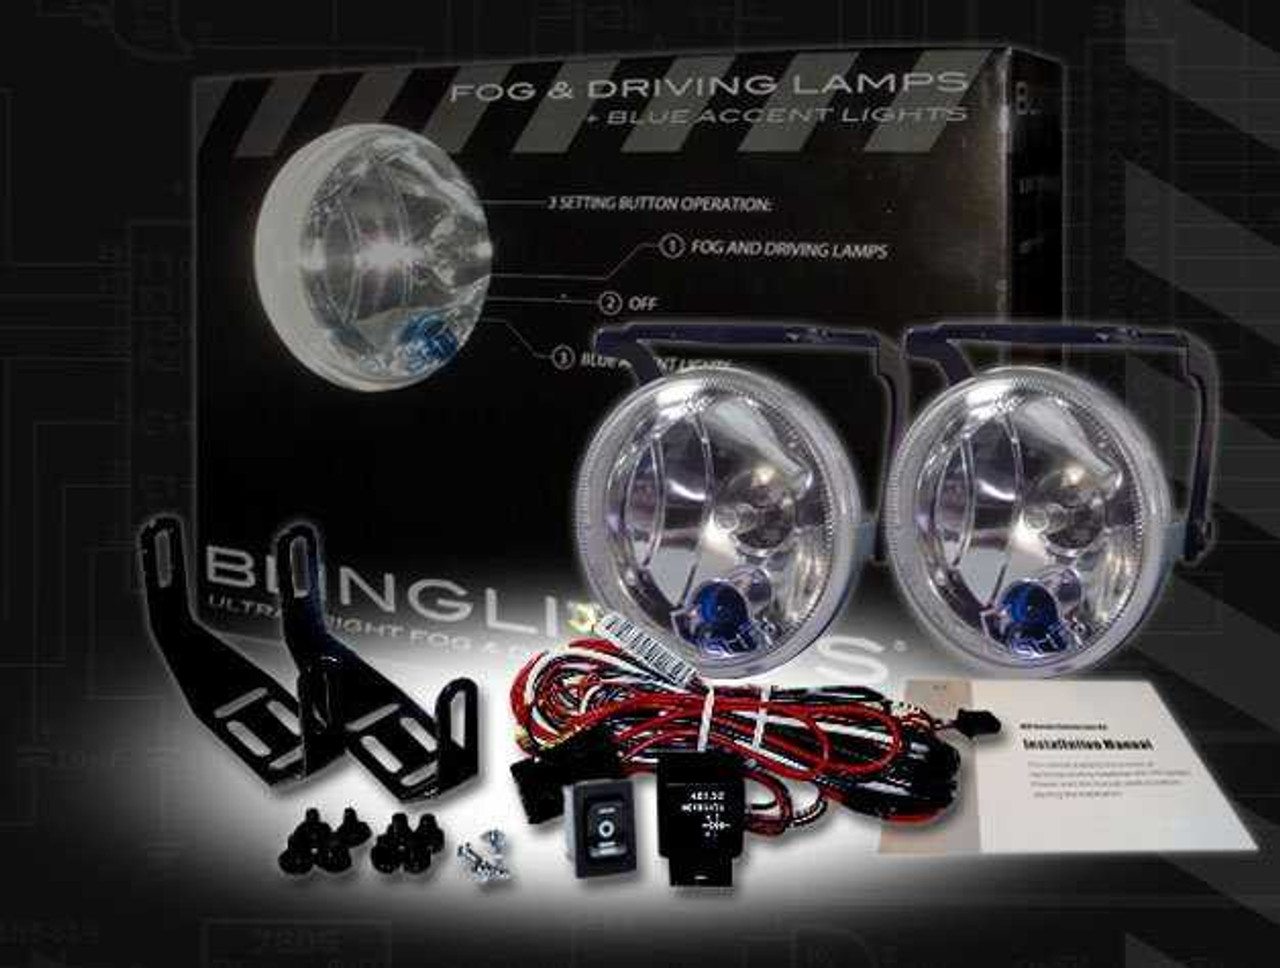 BlingLights Brand Fog Driving Lamps for 1999-2007 Ford F-550 Super Duty